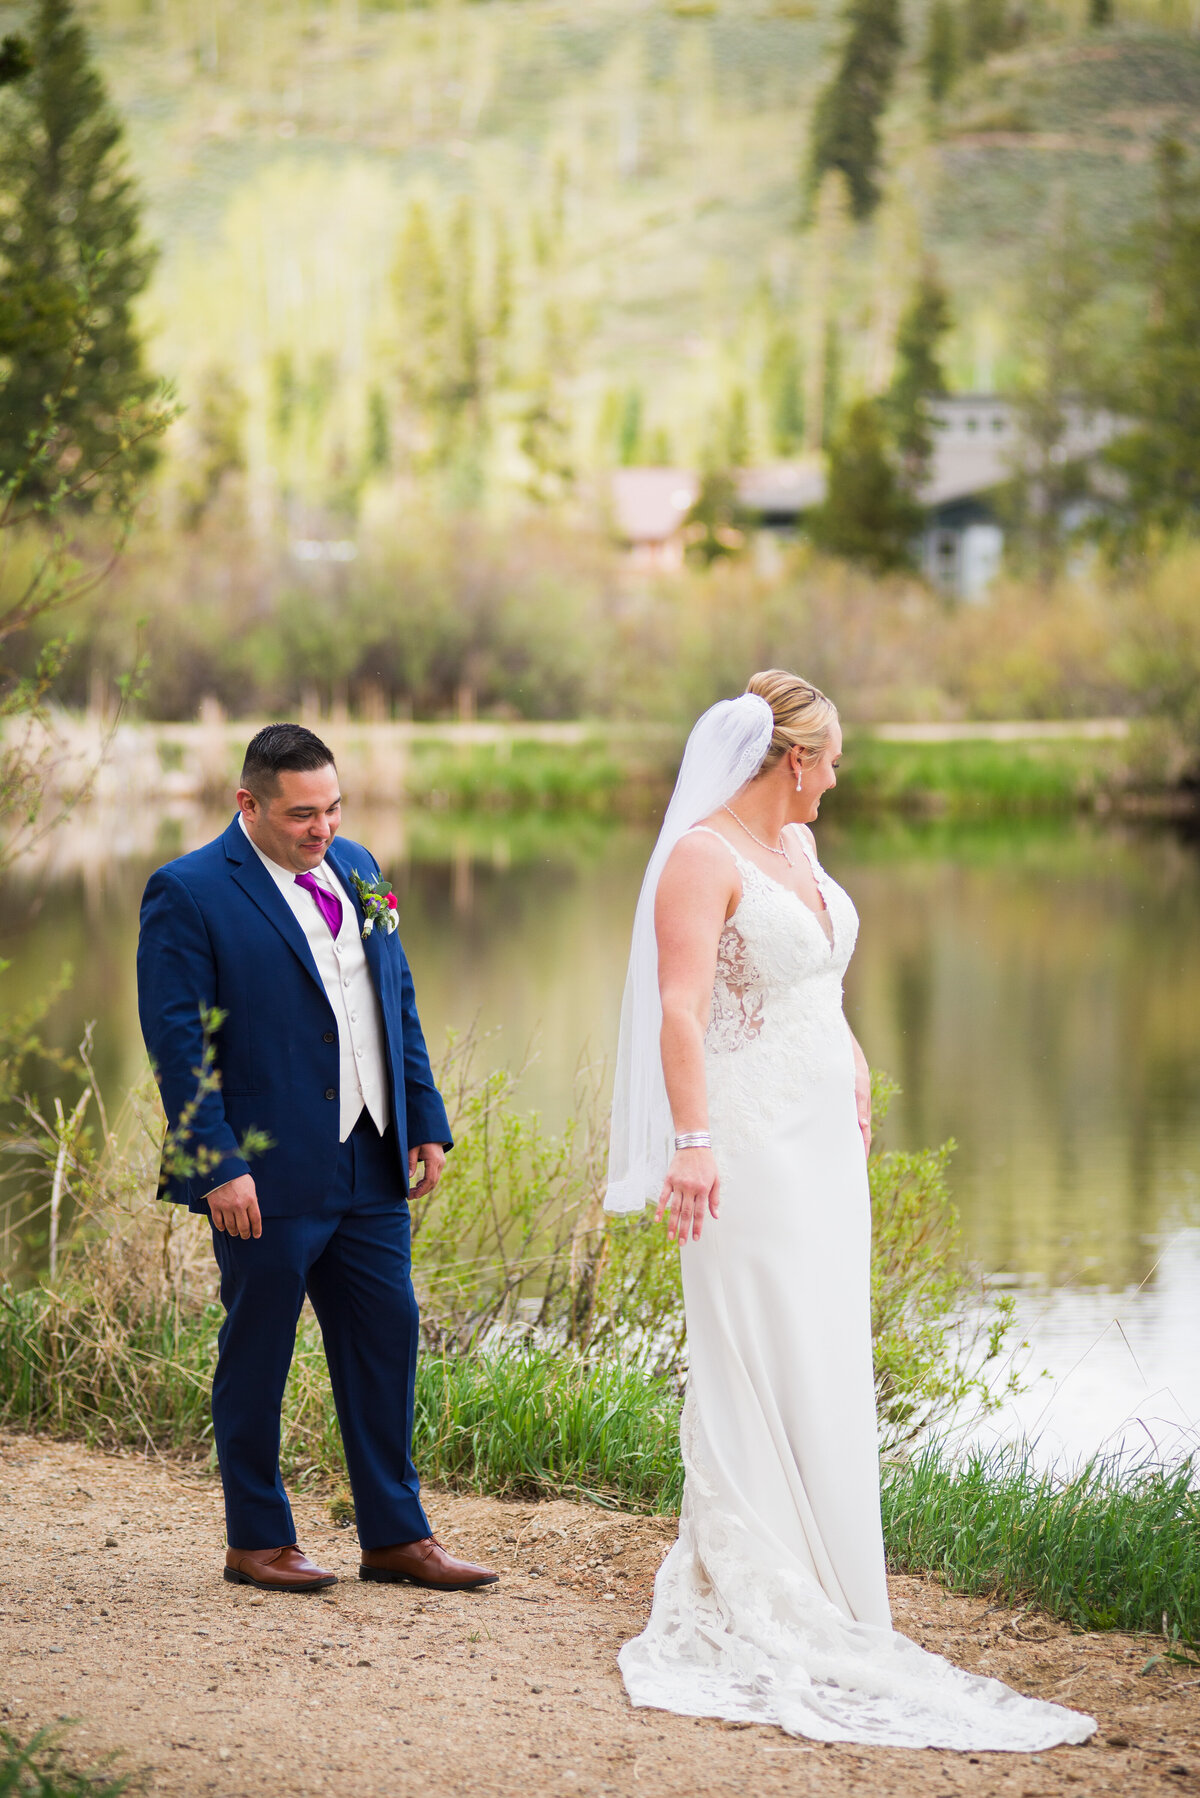 A groom checks out the back of his bride's dress in front of a pond during their first look.